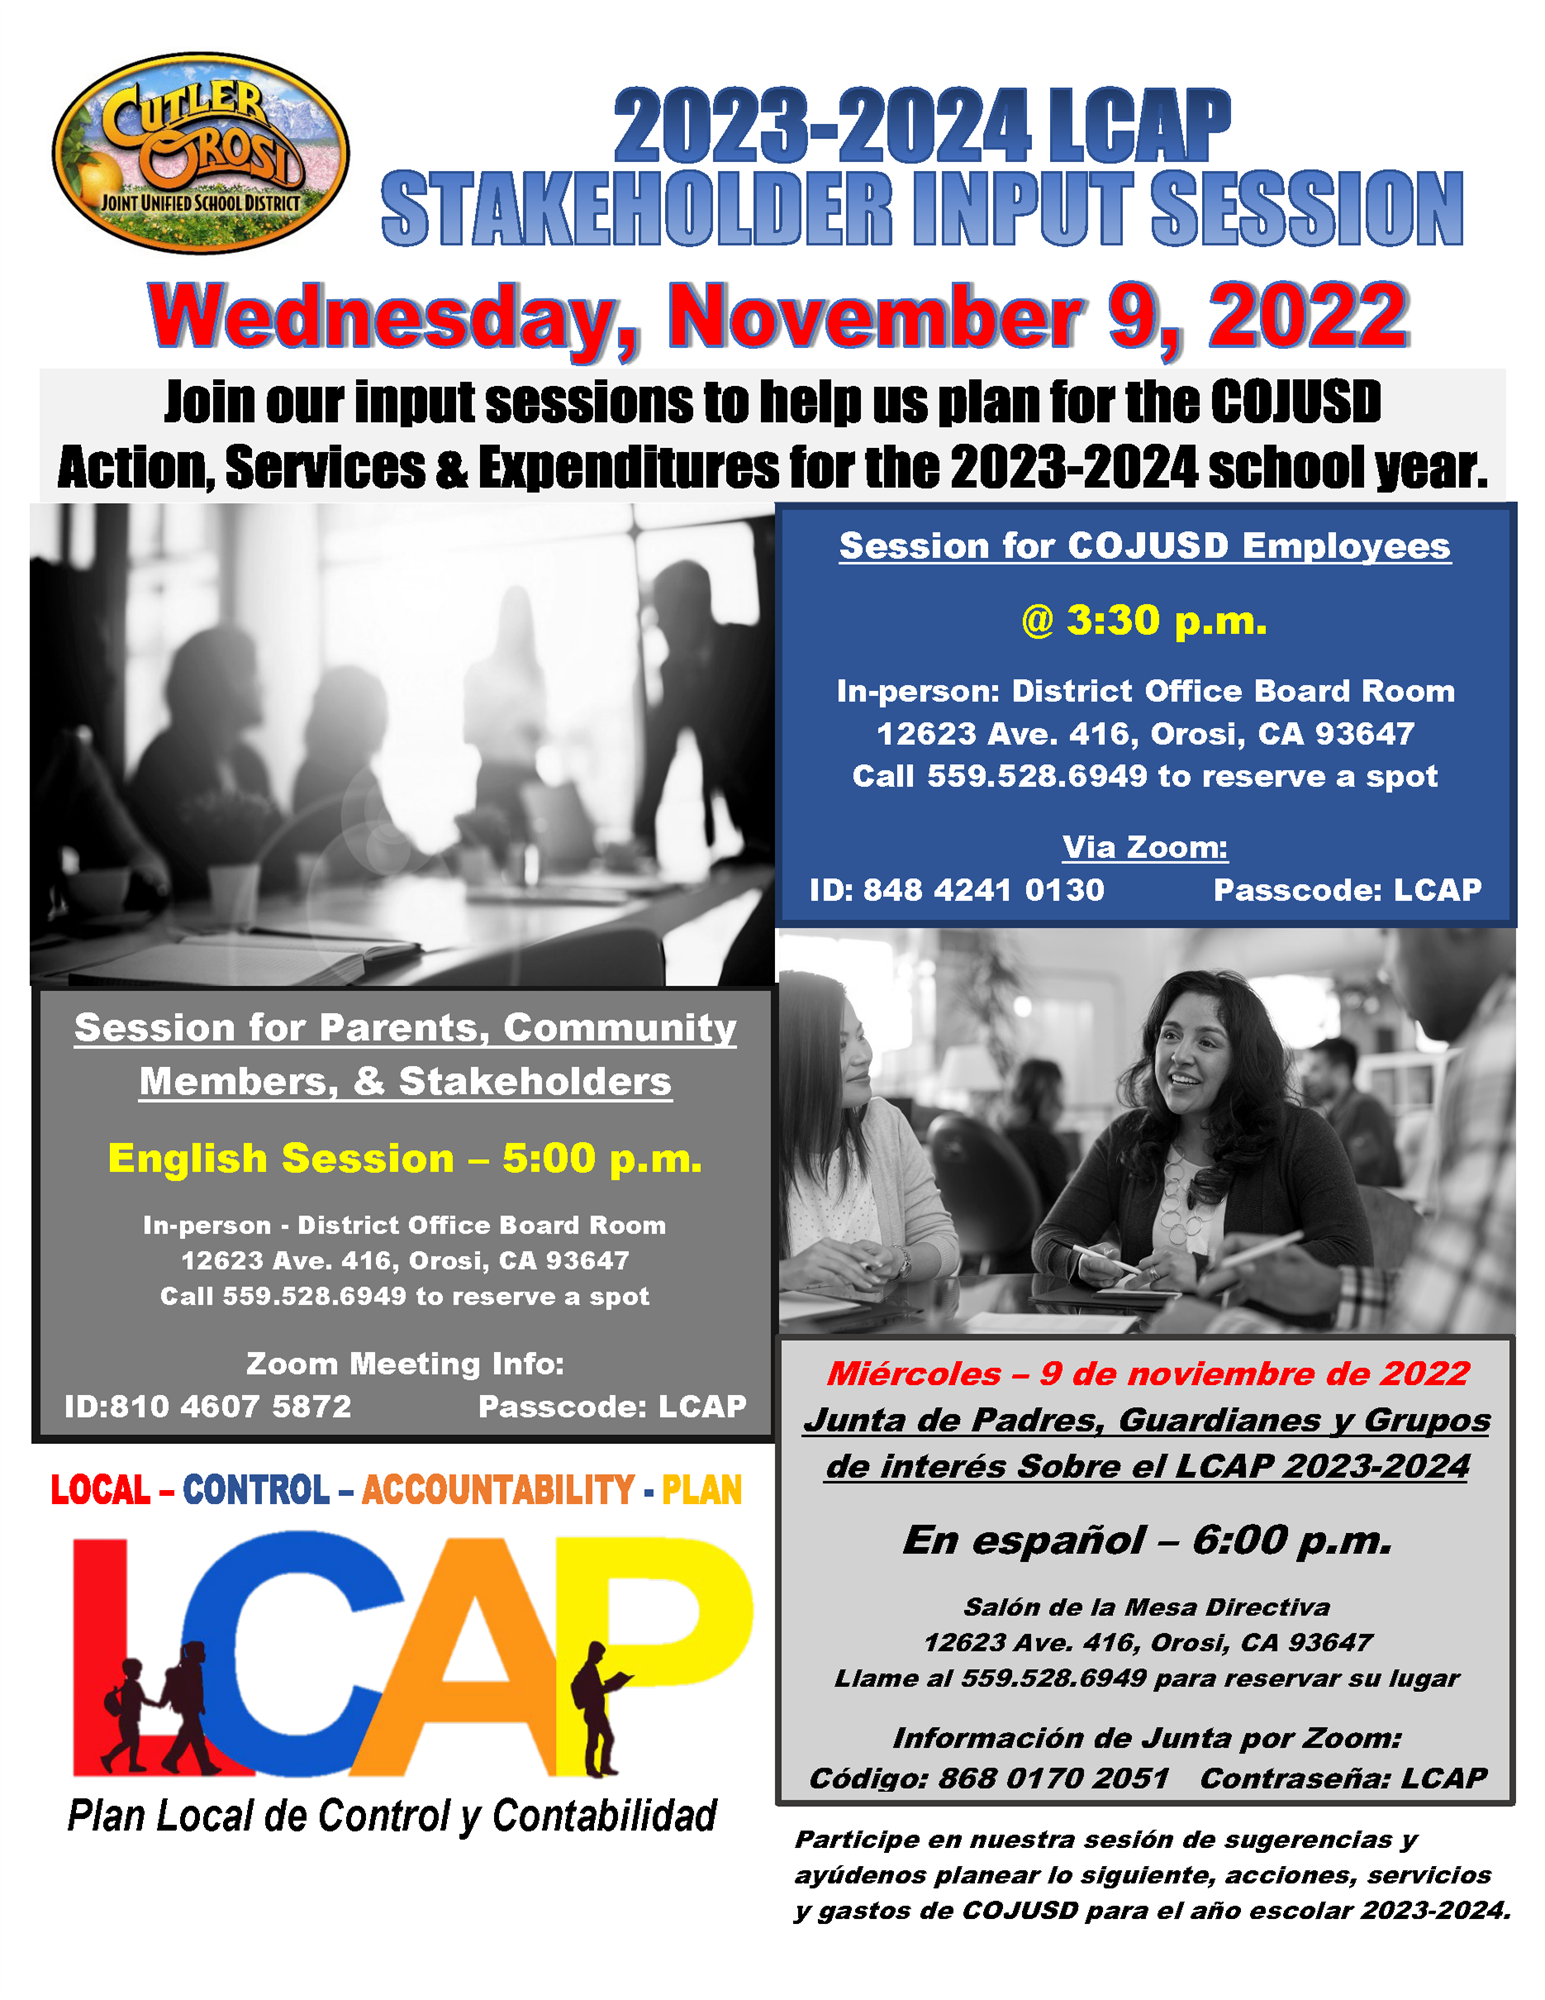 2023-2024 LCAP stakeholder input session